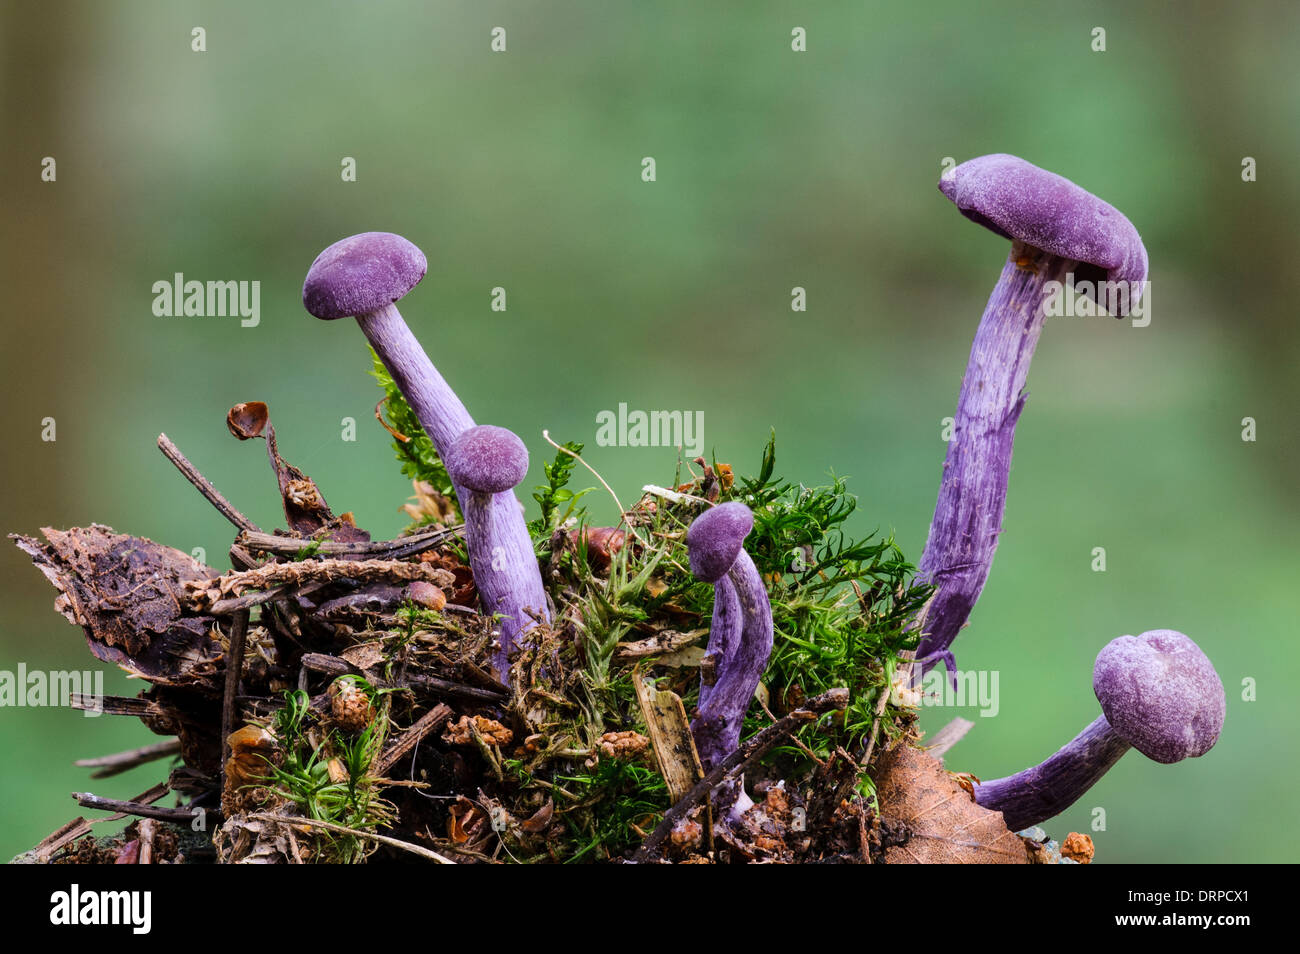 Amethyst deceivers (Laccaria amethystina) growing from a moss covered clump of woodland debris in Clumber Park, Nottinghamshire. Stock Photo